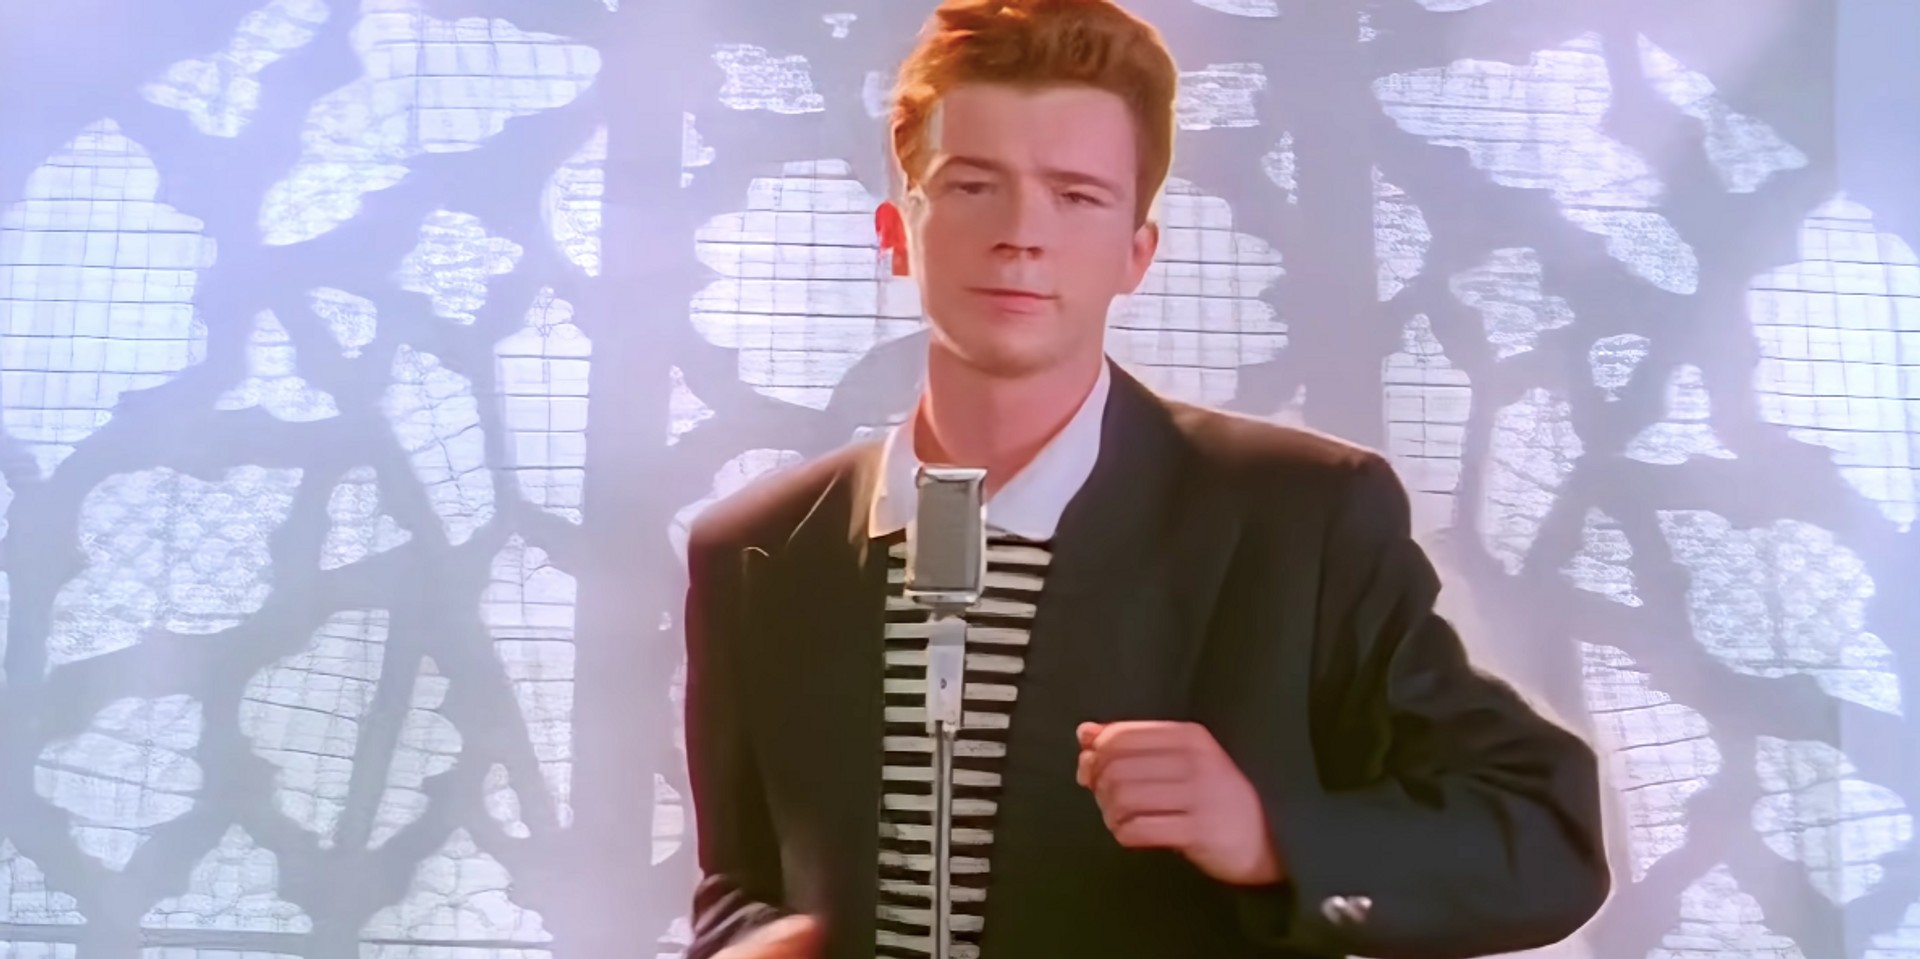 Never Gonna Give You up' Remastered: Rick Roll Song Remade in 4K Video